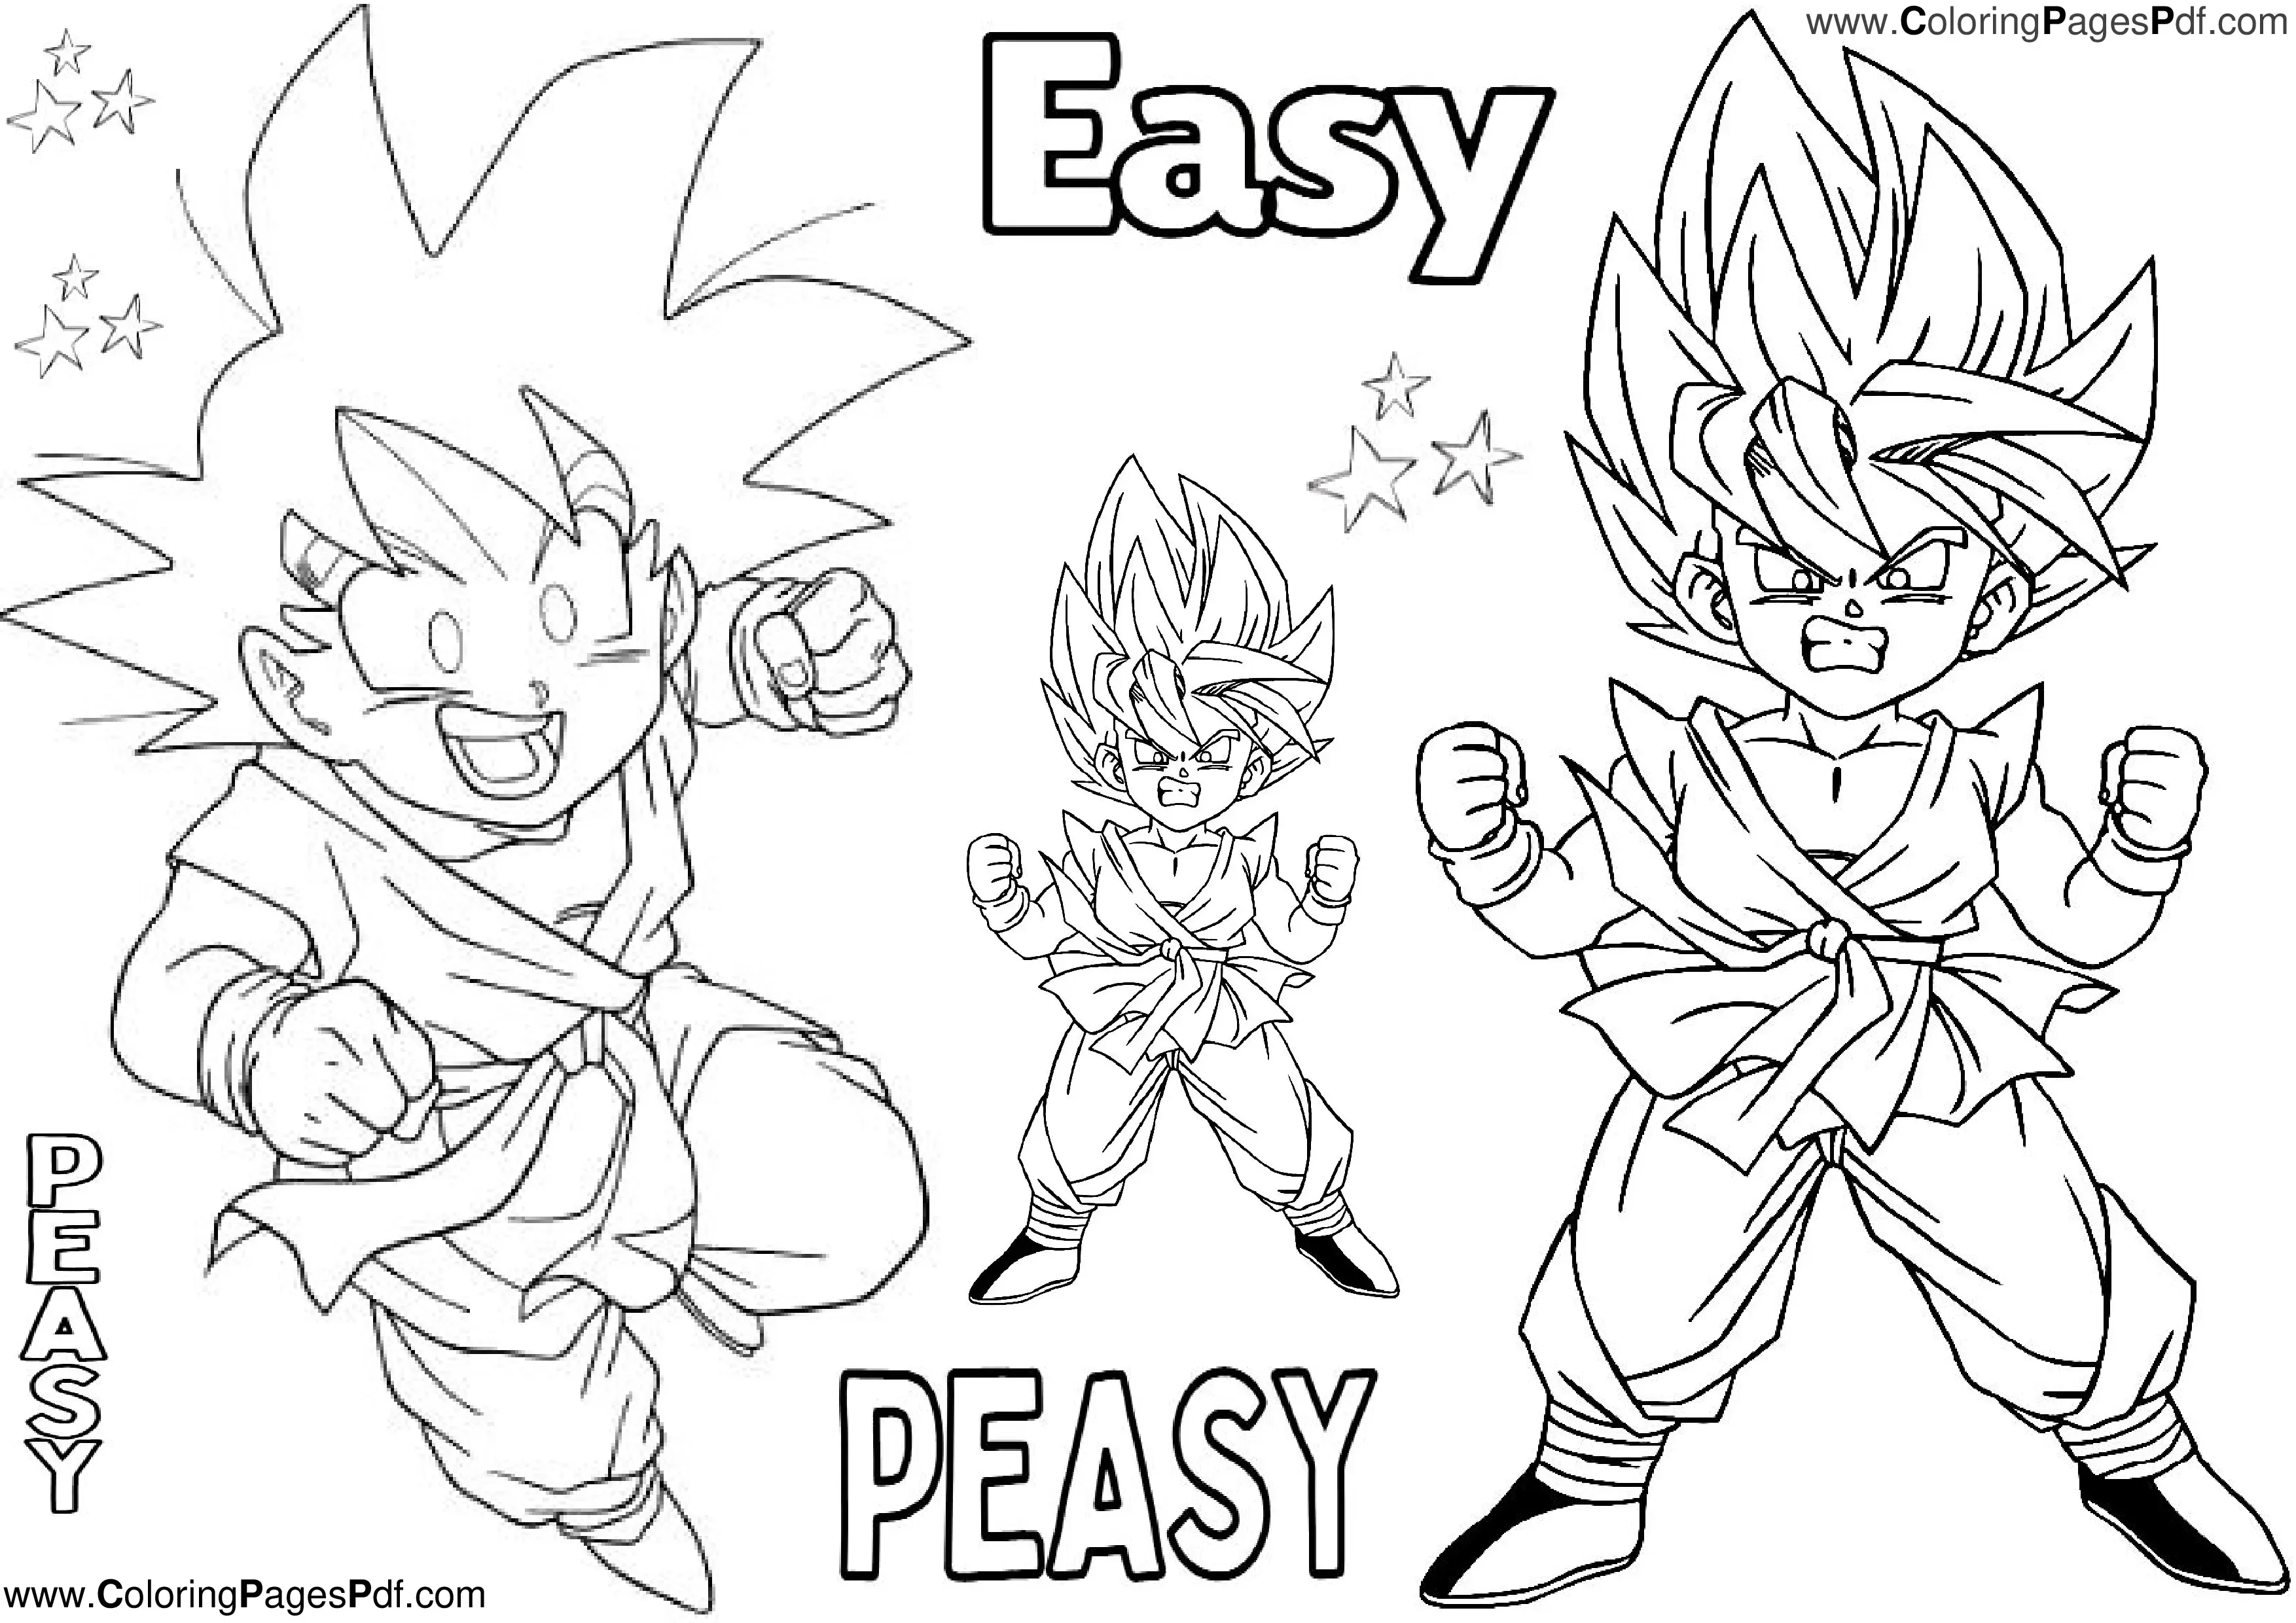 Goku coloring pages for kids